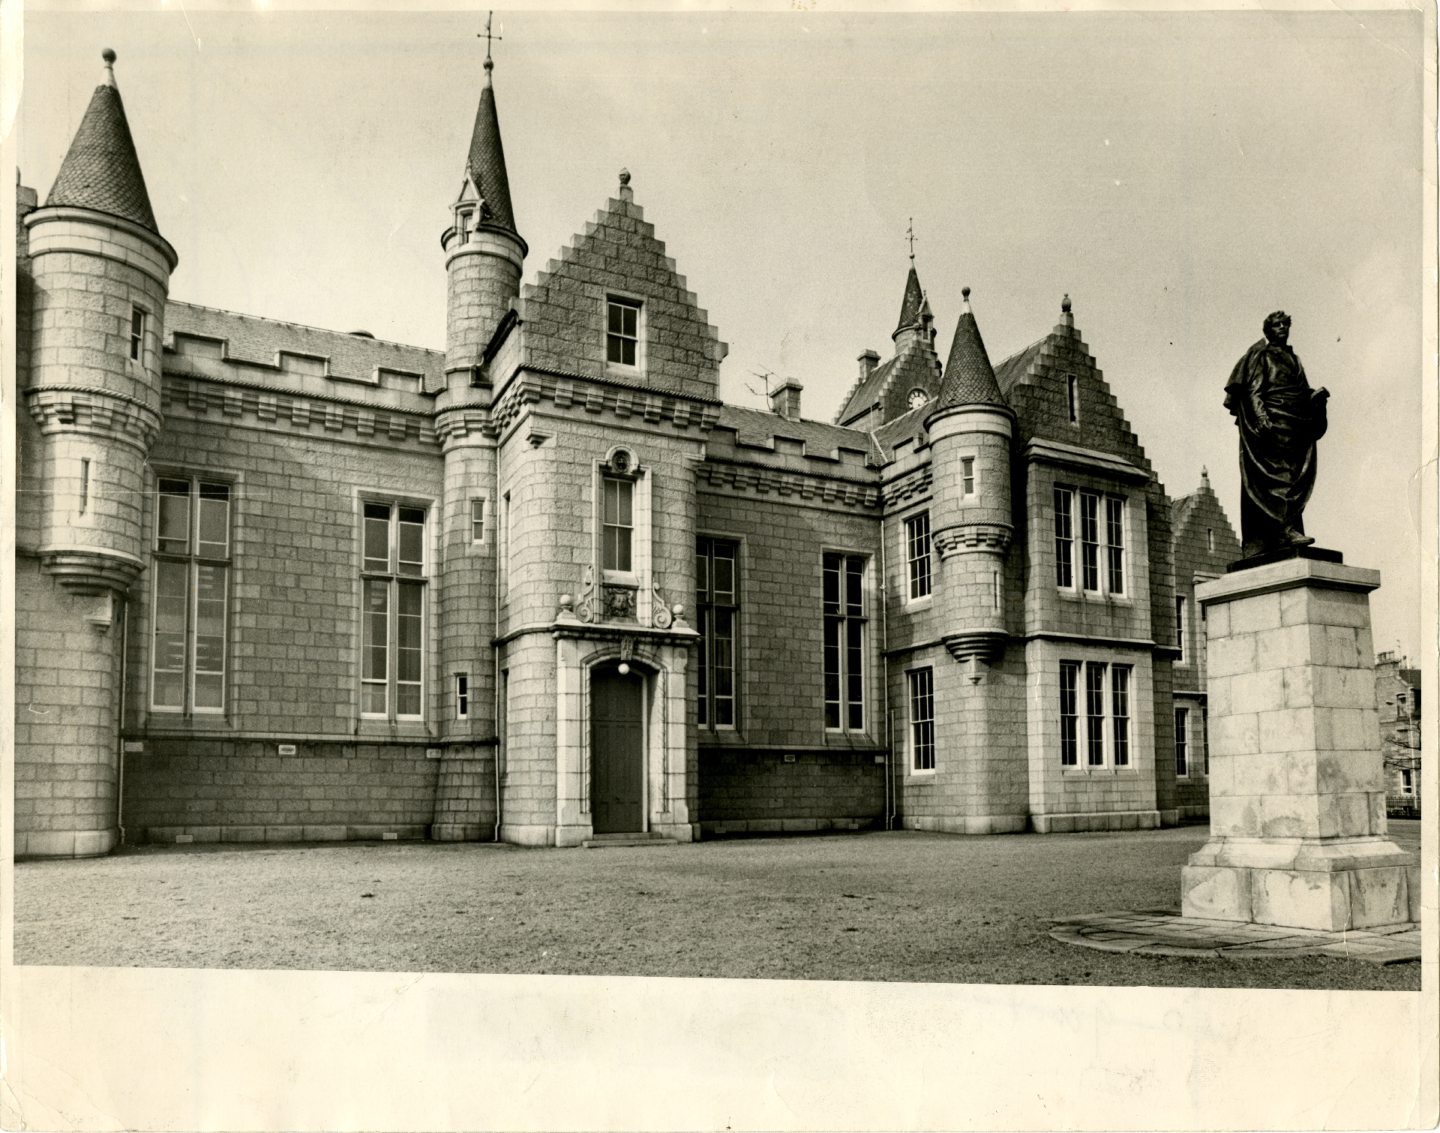 Statue of poet Lord Byron in front of the school building in 1979.